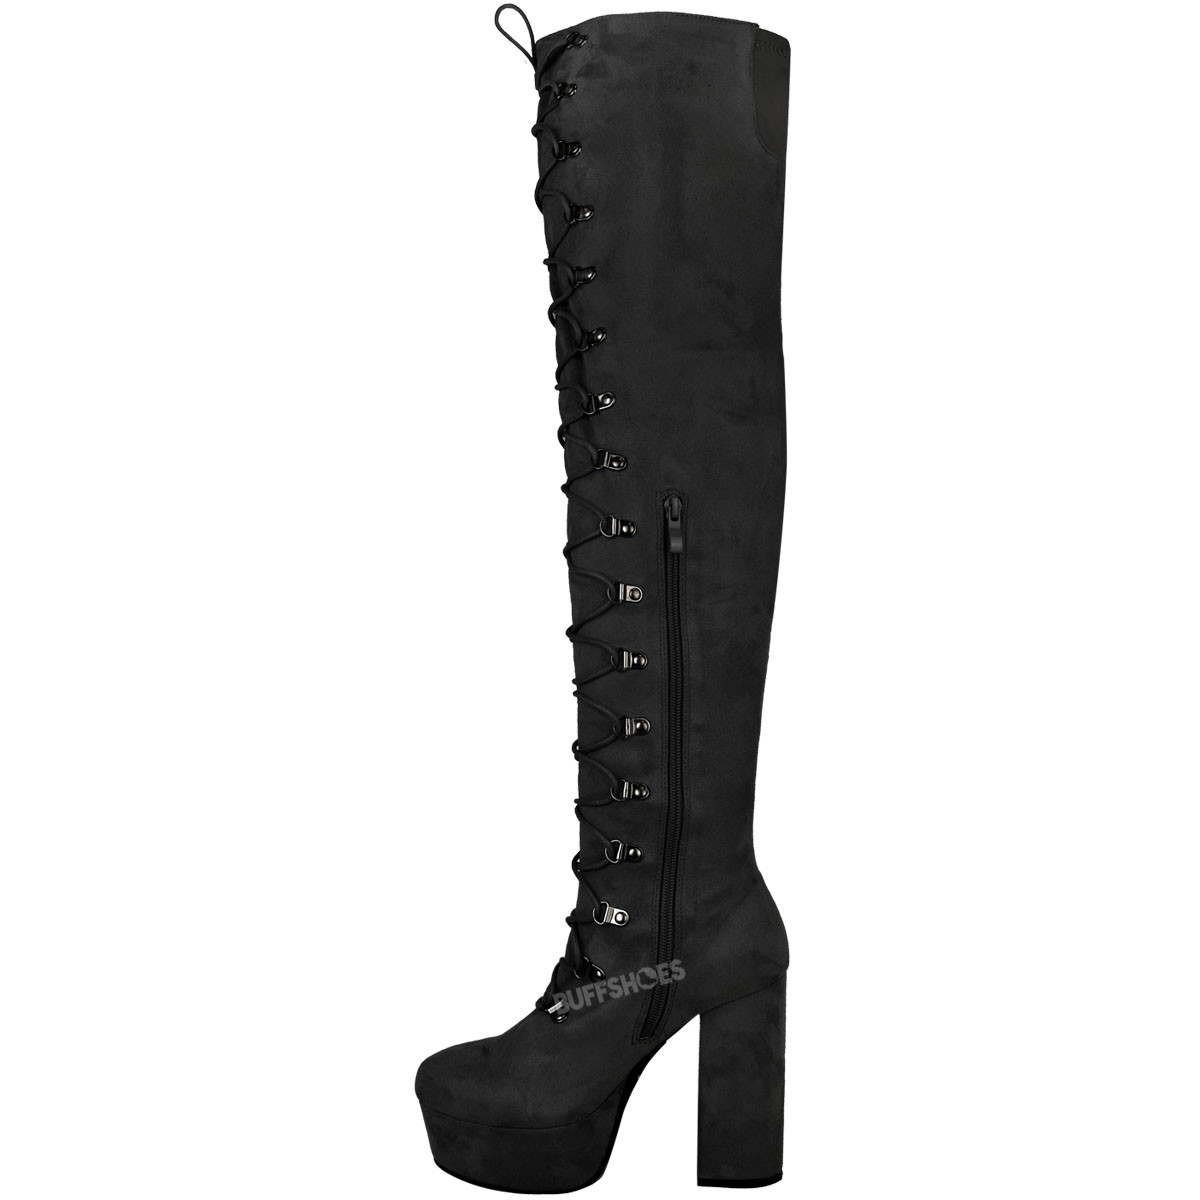 Womens Ladies Boots Thigh High Over The Knee Stiletto Heel Lace Up Shoes Size 